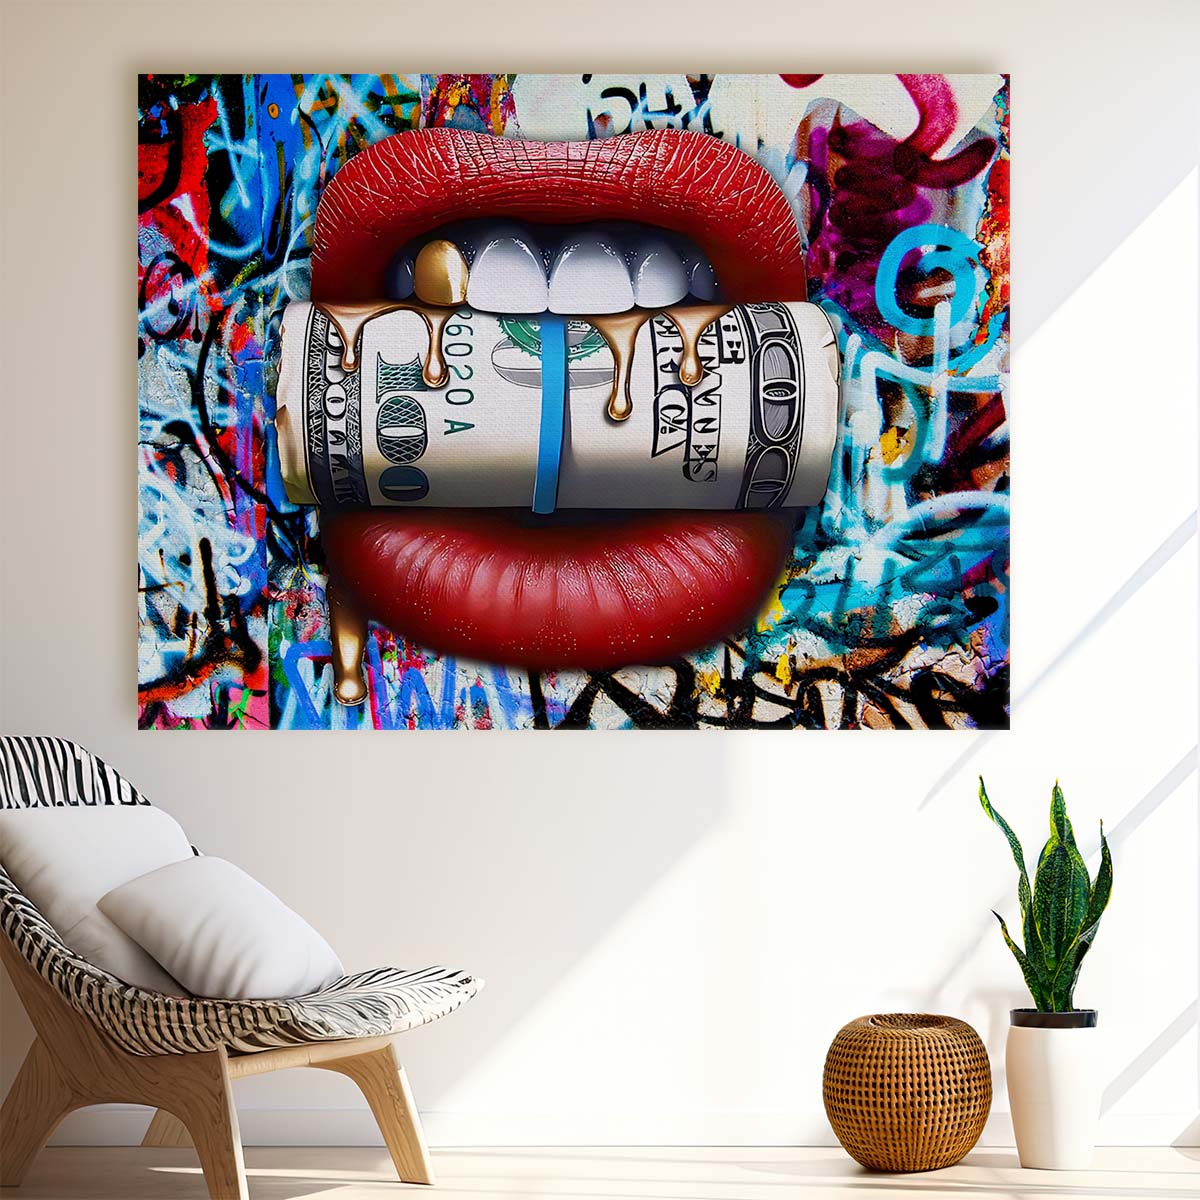 Dollars On My Lips Graffiti Wall Art by Luxuriance Designs. Made in USA.